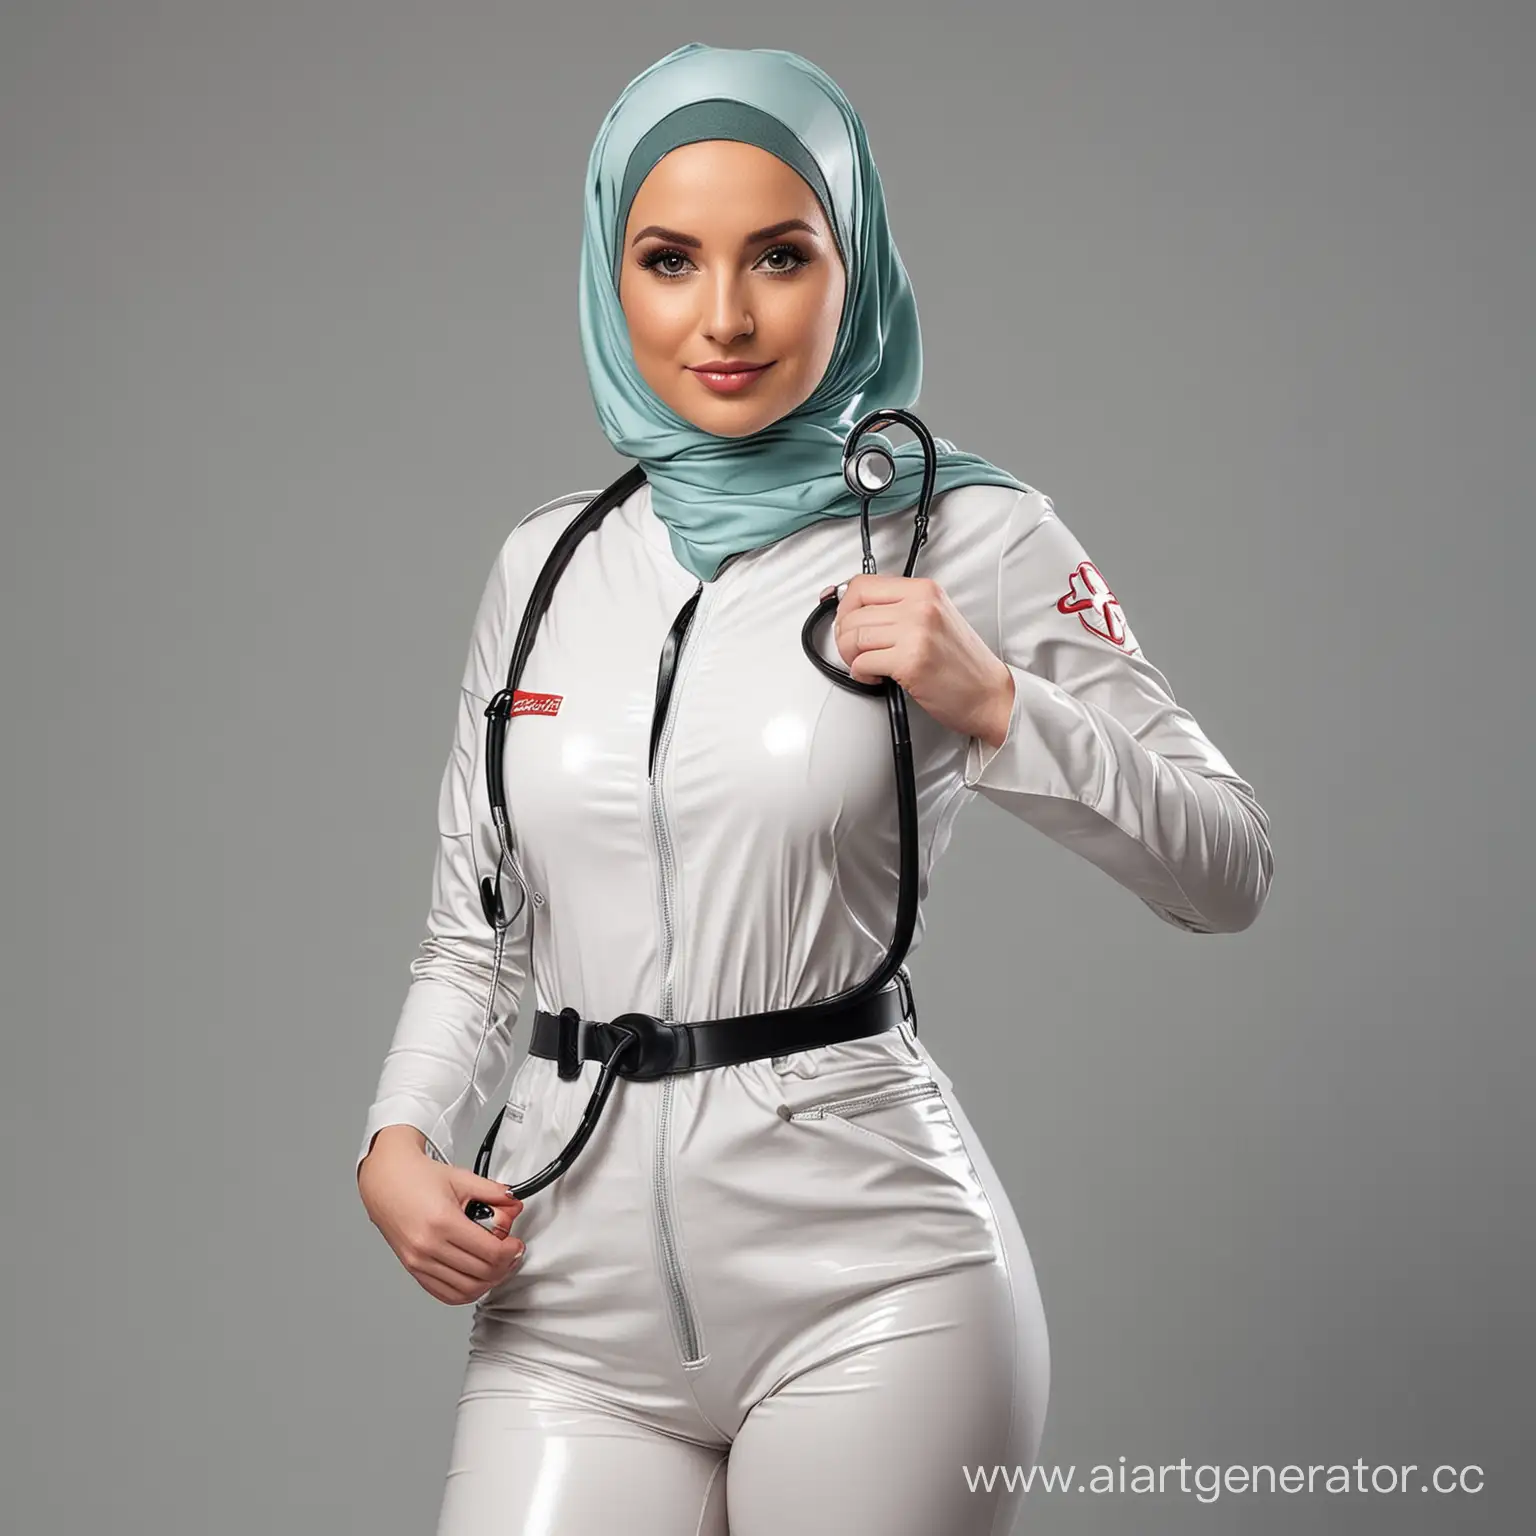 Draw a nurse woman holding a stethoscope wearing a hijab latex catsuit